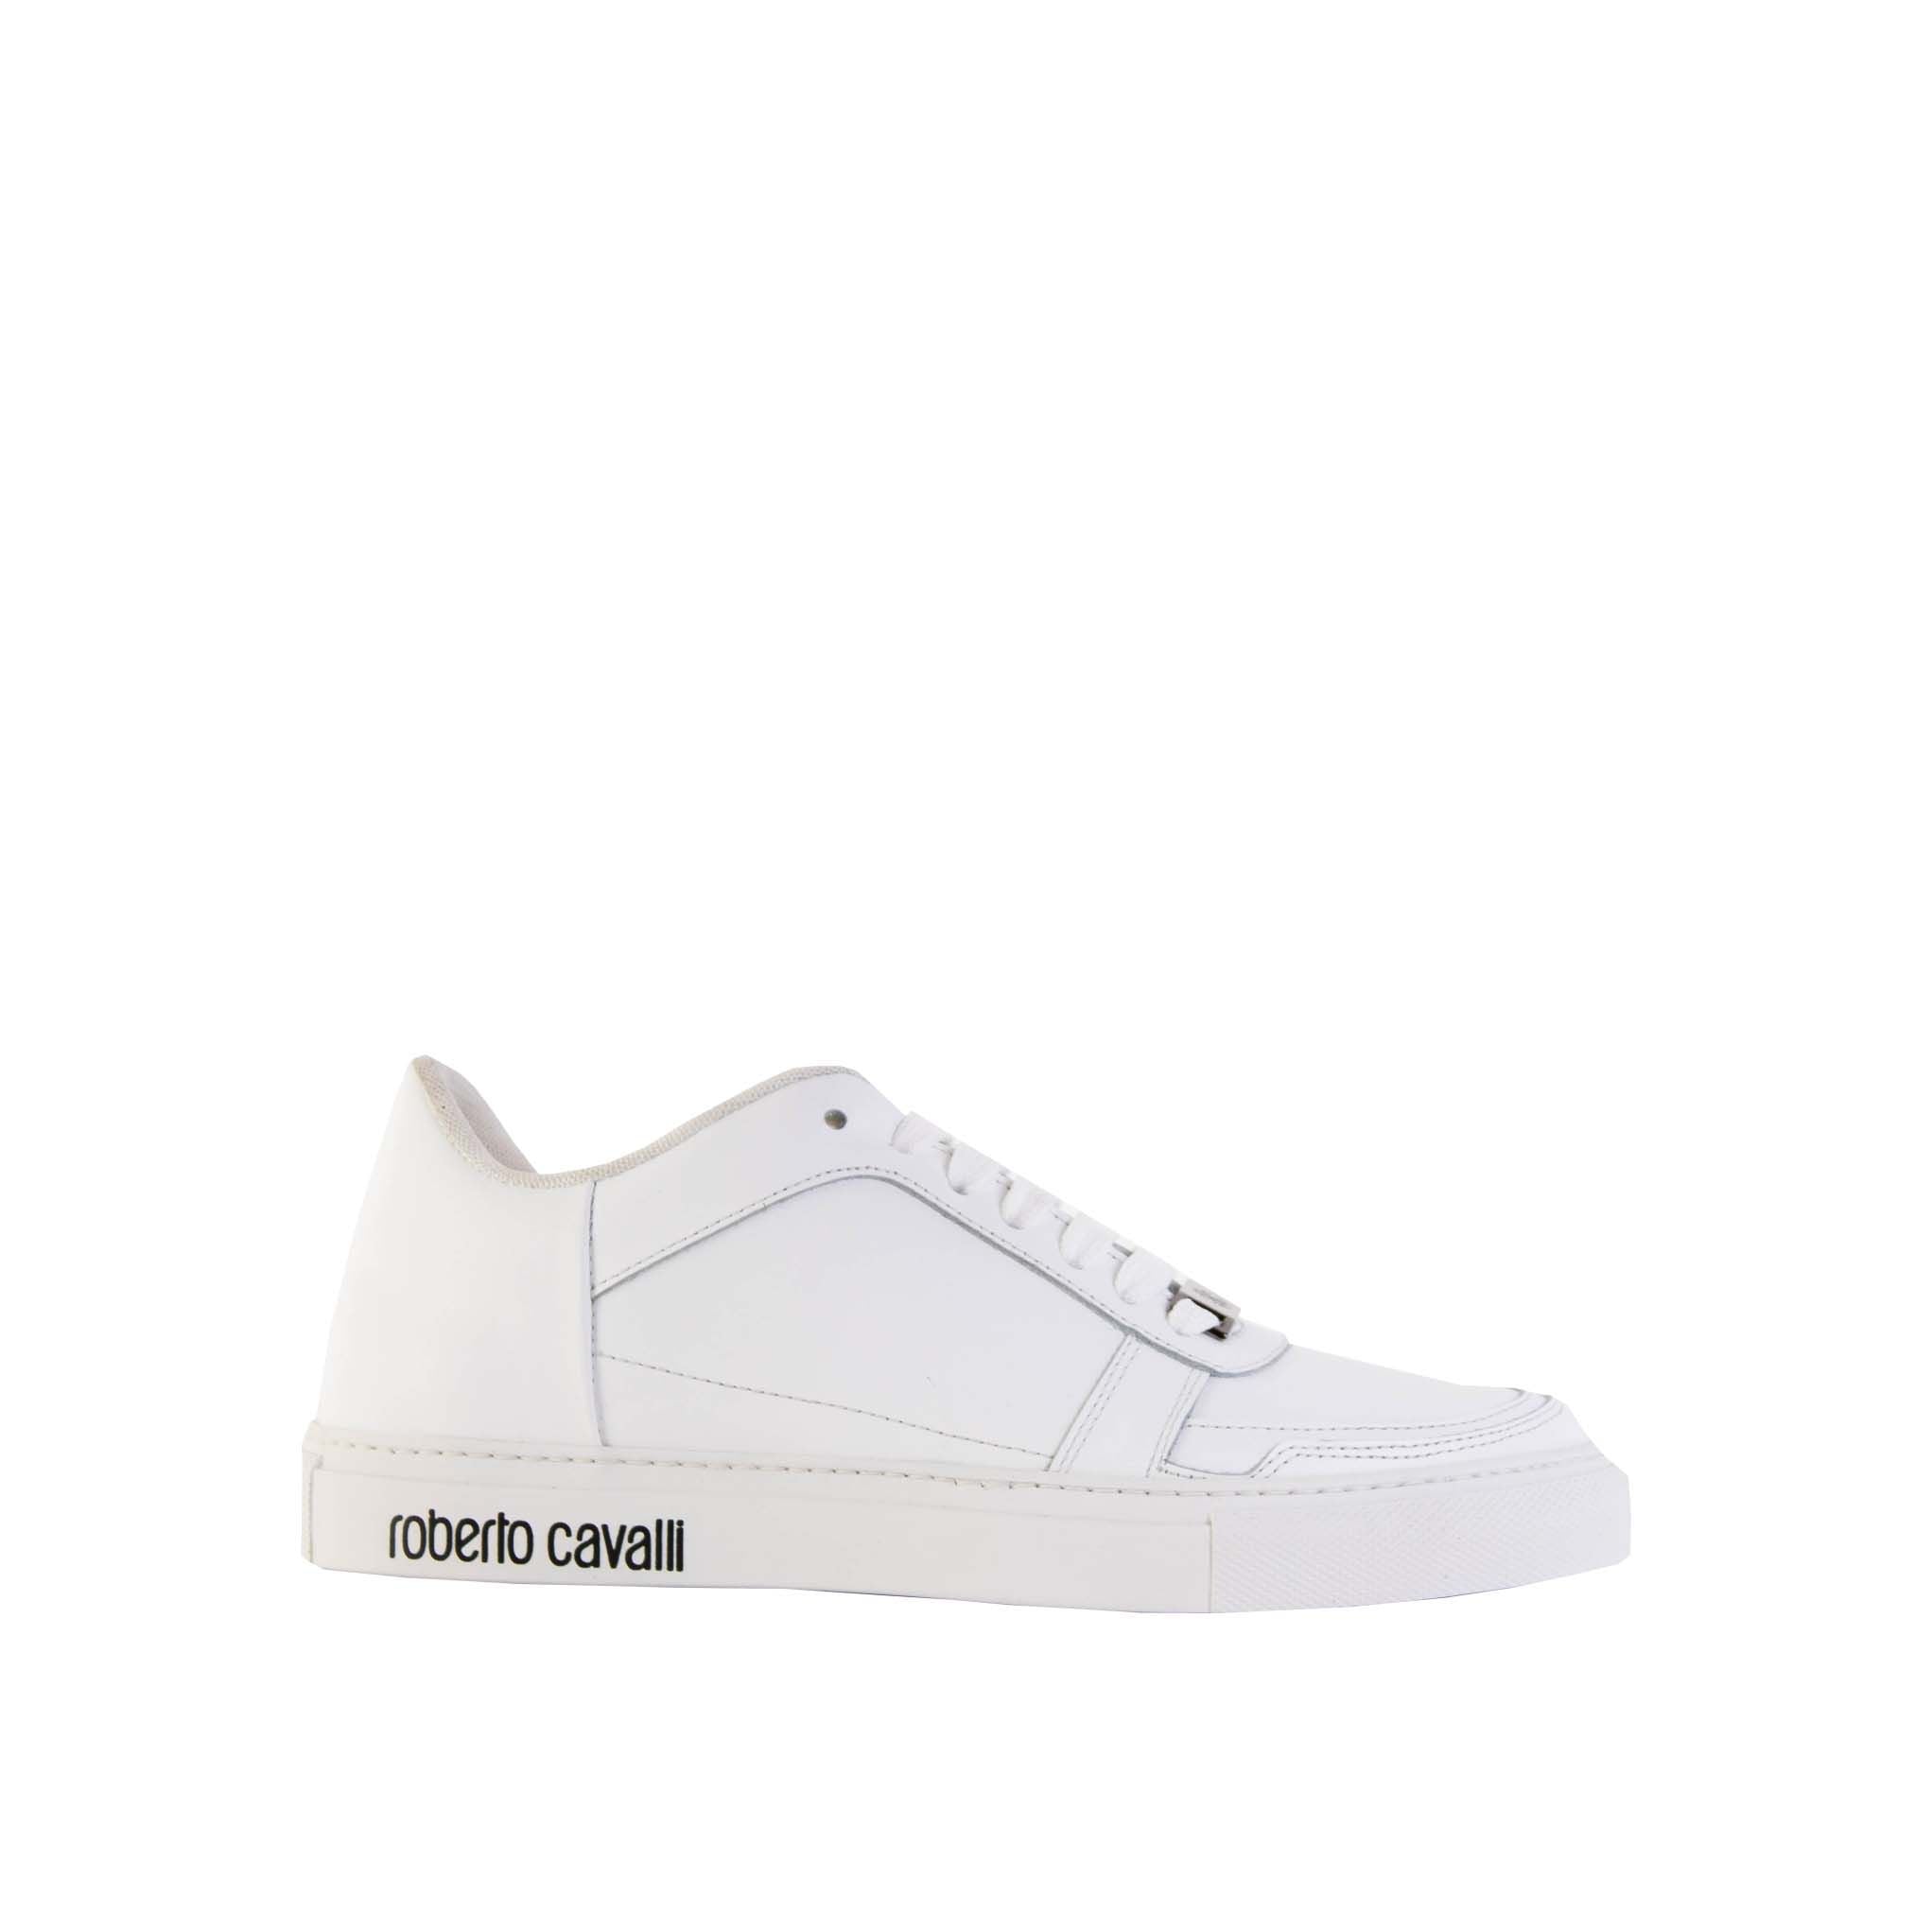 Exquisite White Suede Sneakers